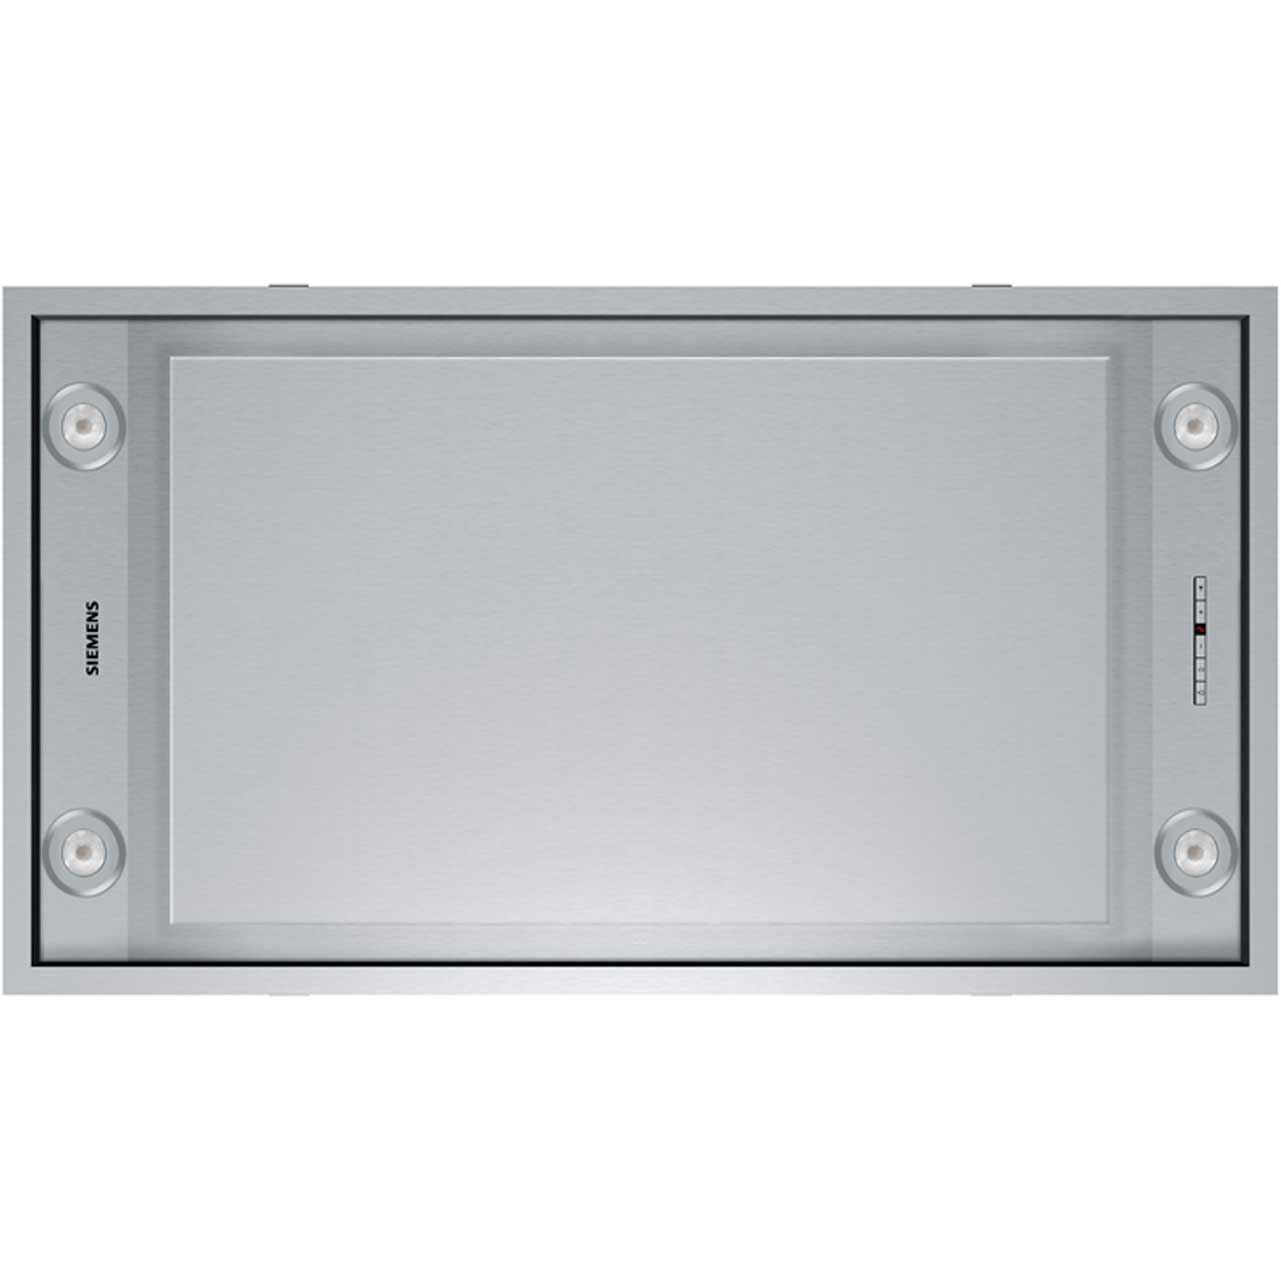 Siemens IQ-700 LF959RB51B Integrated Cooker Hood in Stainless Steel